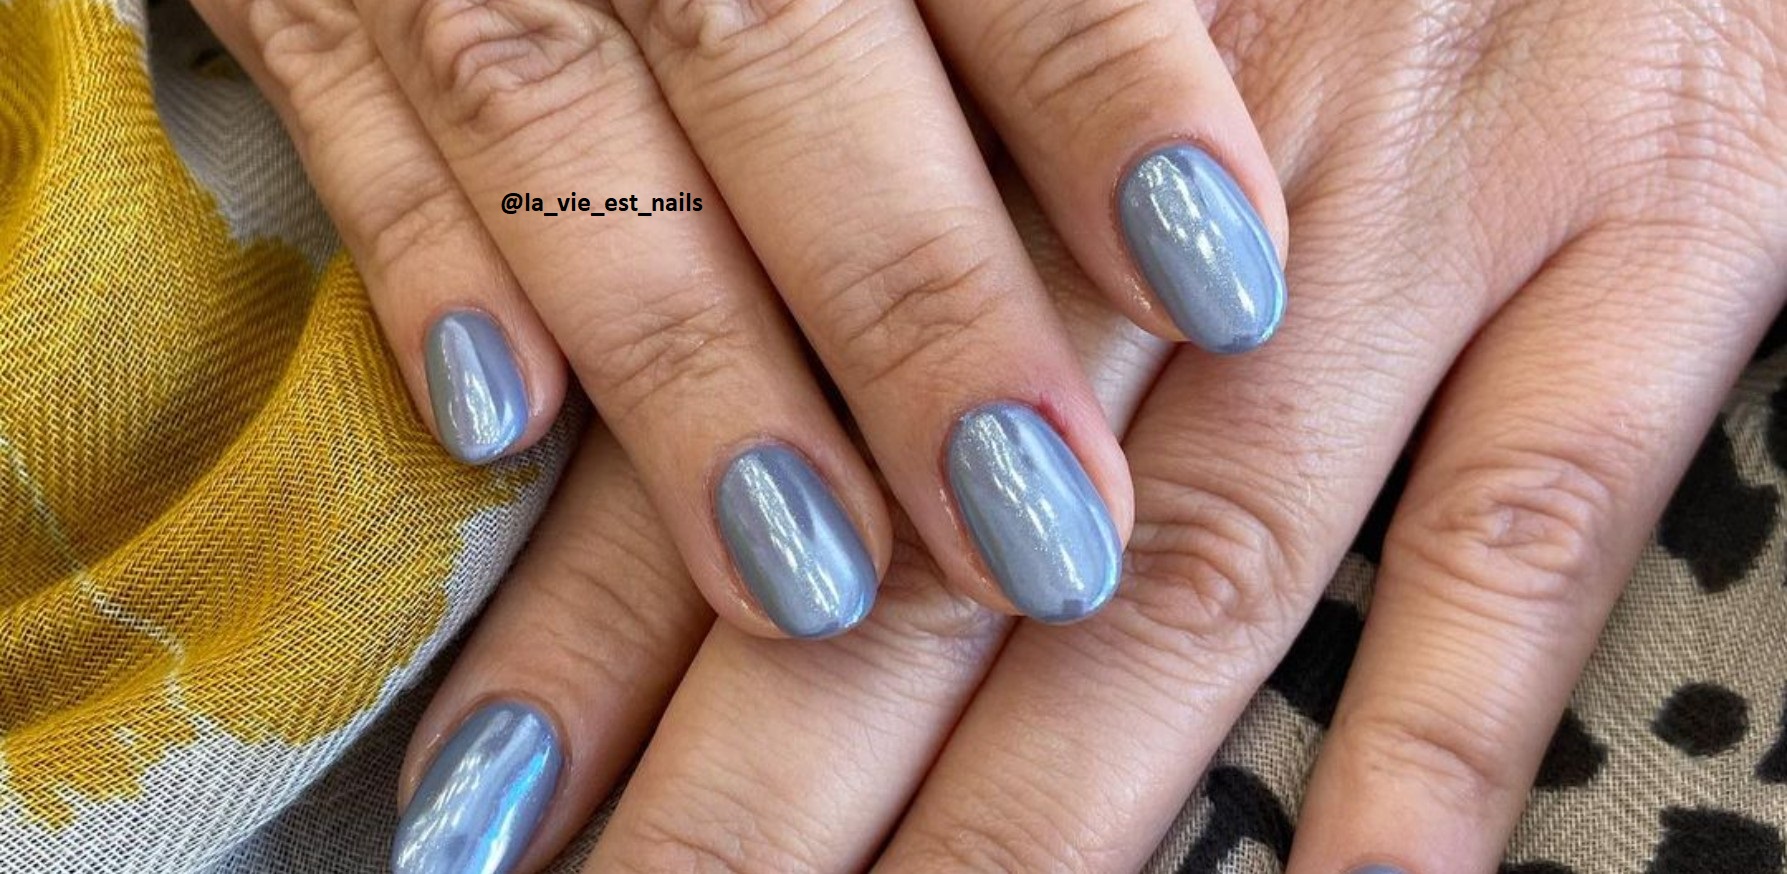 Welcome Winter Season By Wearing These Ice Blue Nails